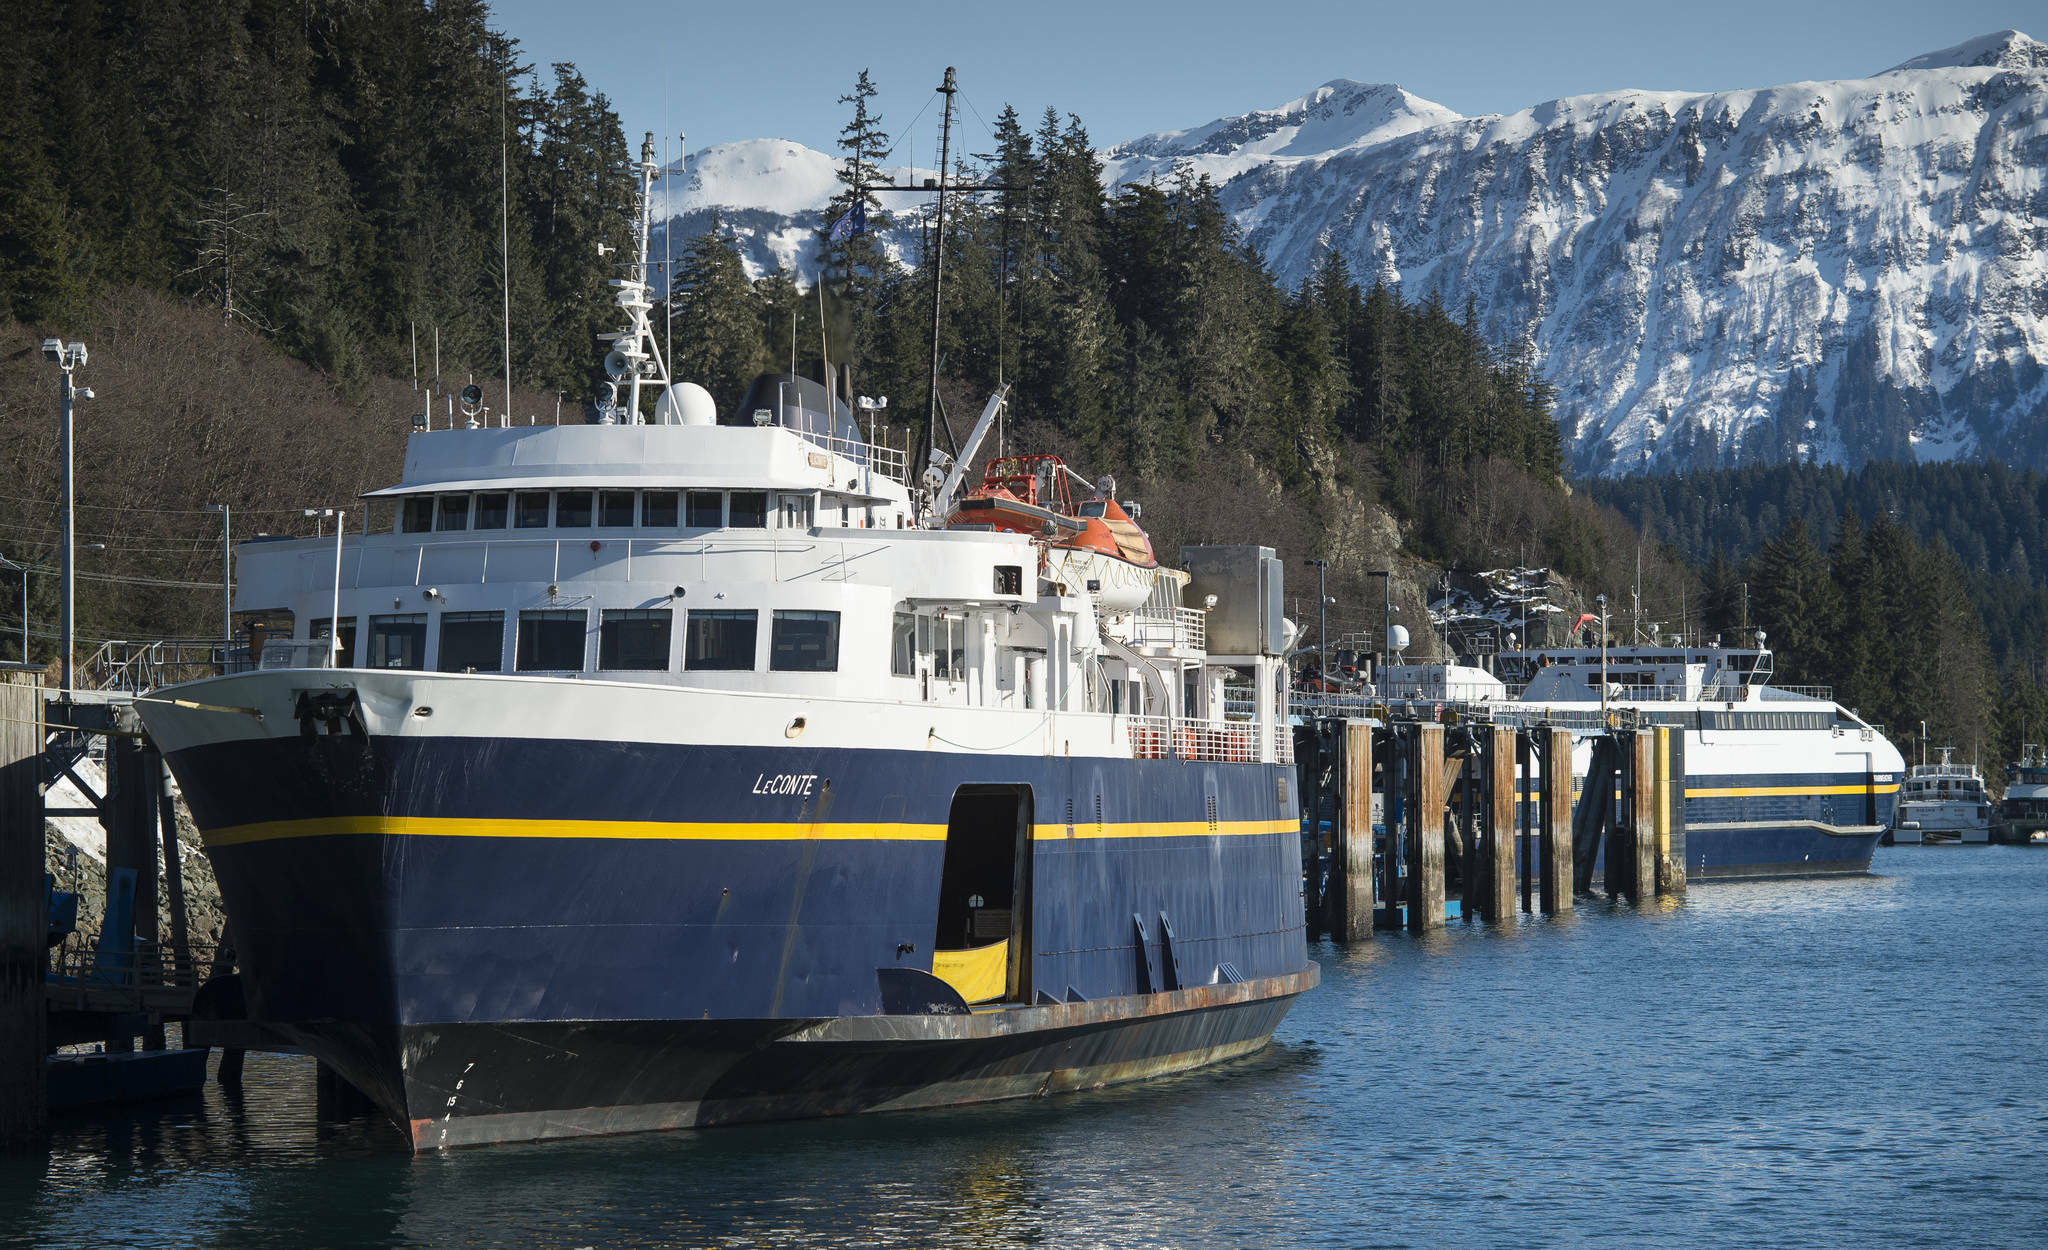 The Alaska Marine Highway System ferry LeConte at the Auke Bay Terminal on Monday, March 5, 2018. (Juneau Empire file photo)